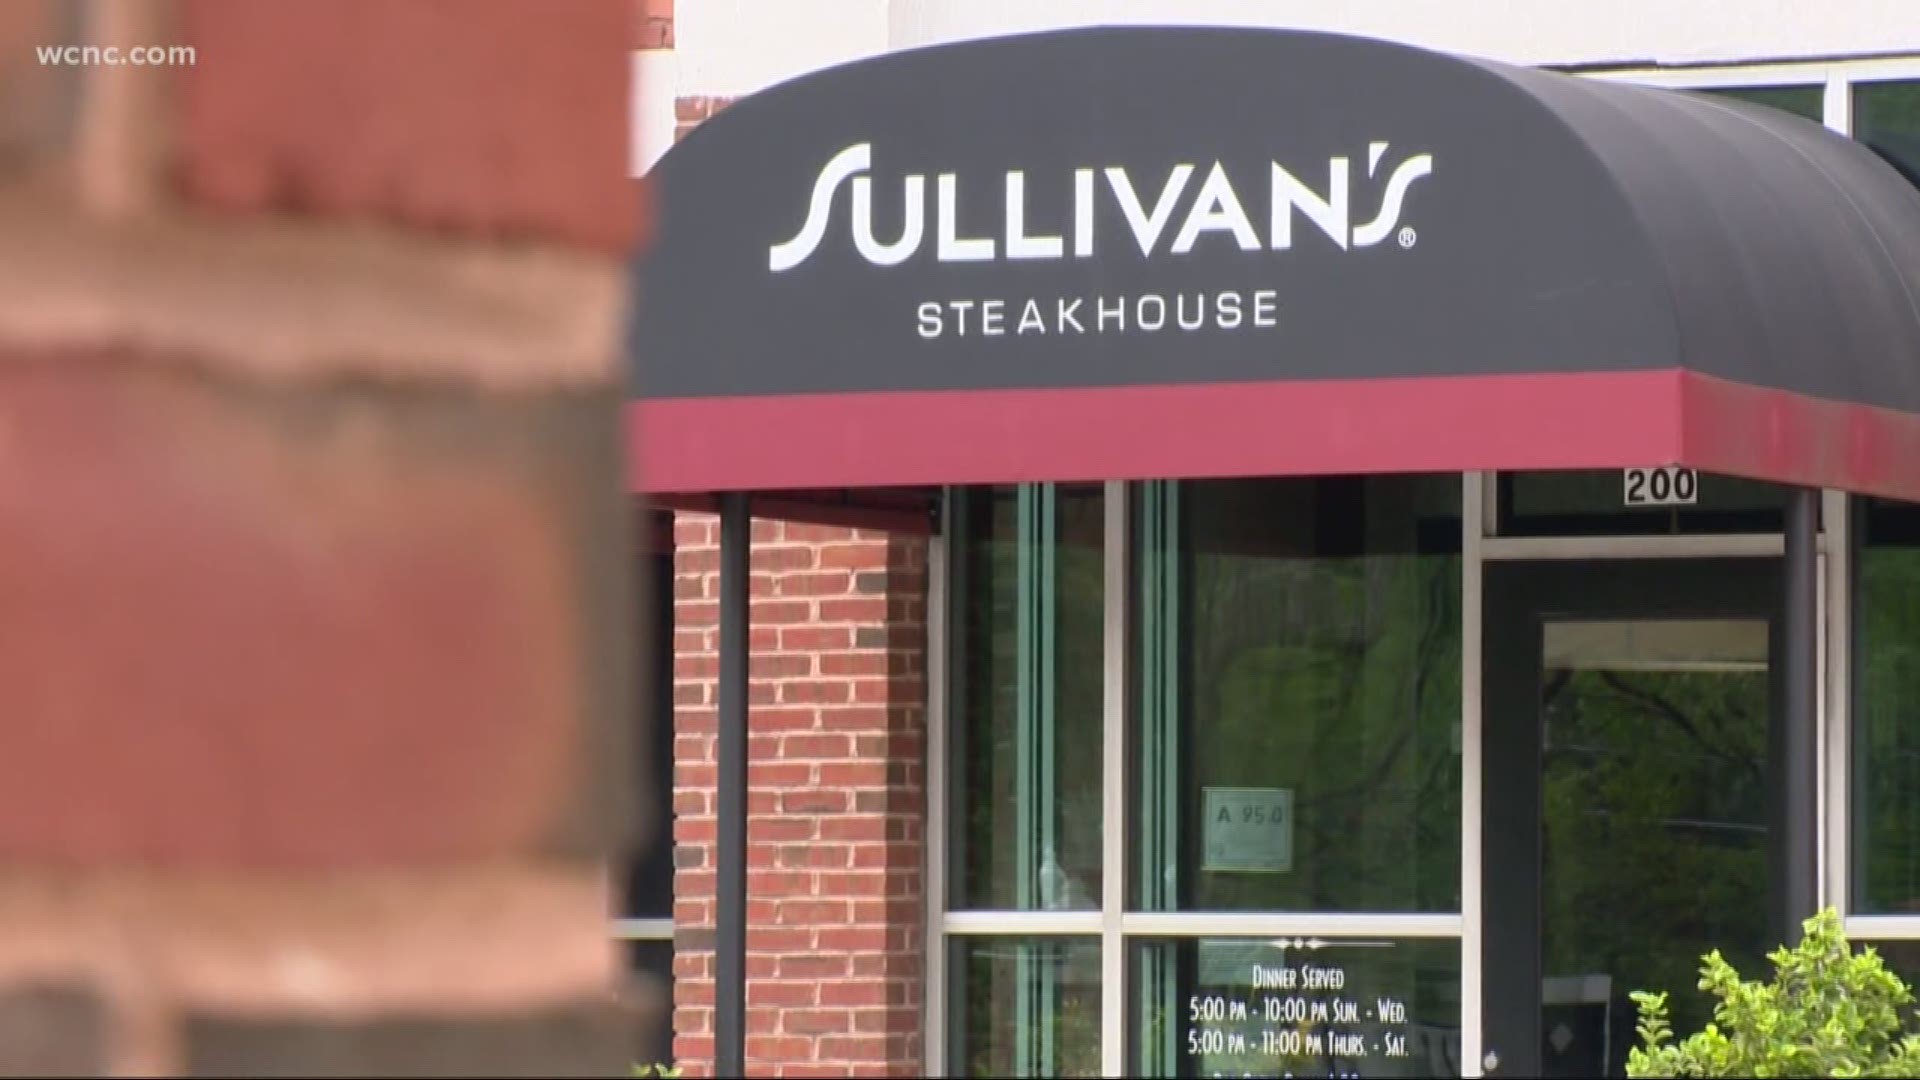 Sullivan's Steakhouse robbed at gunpoint in South End